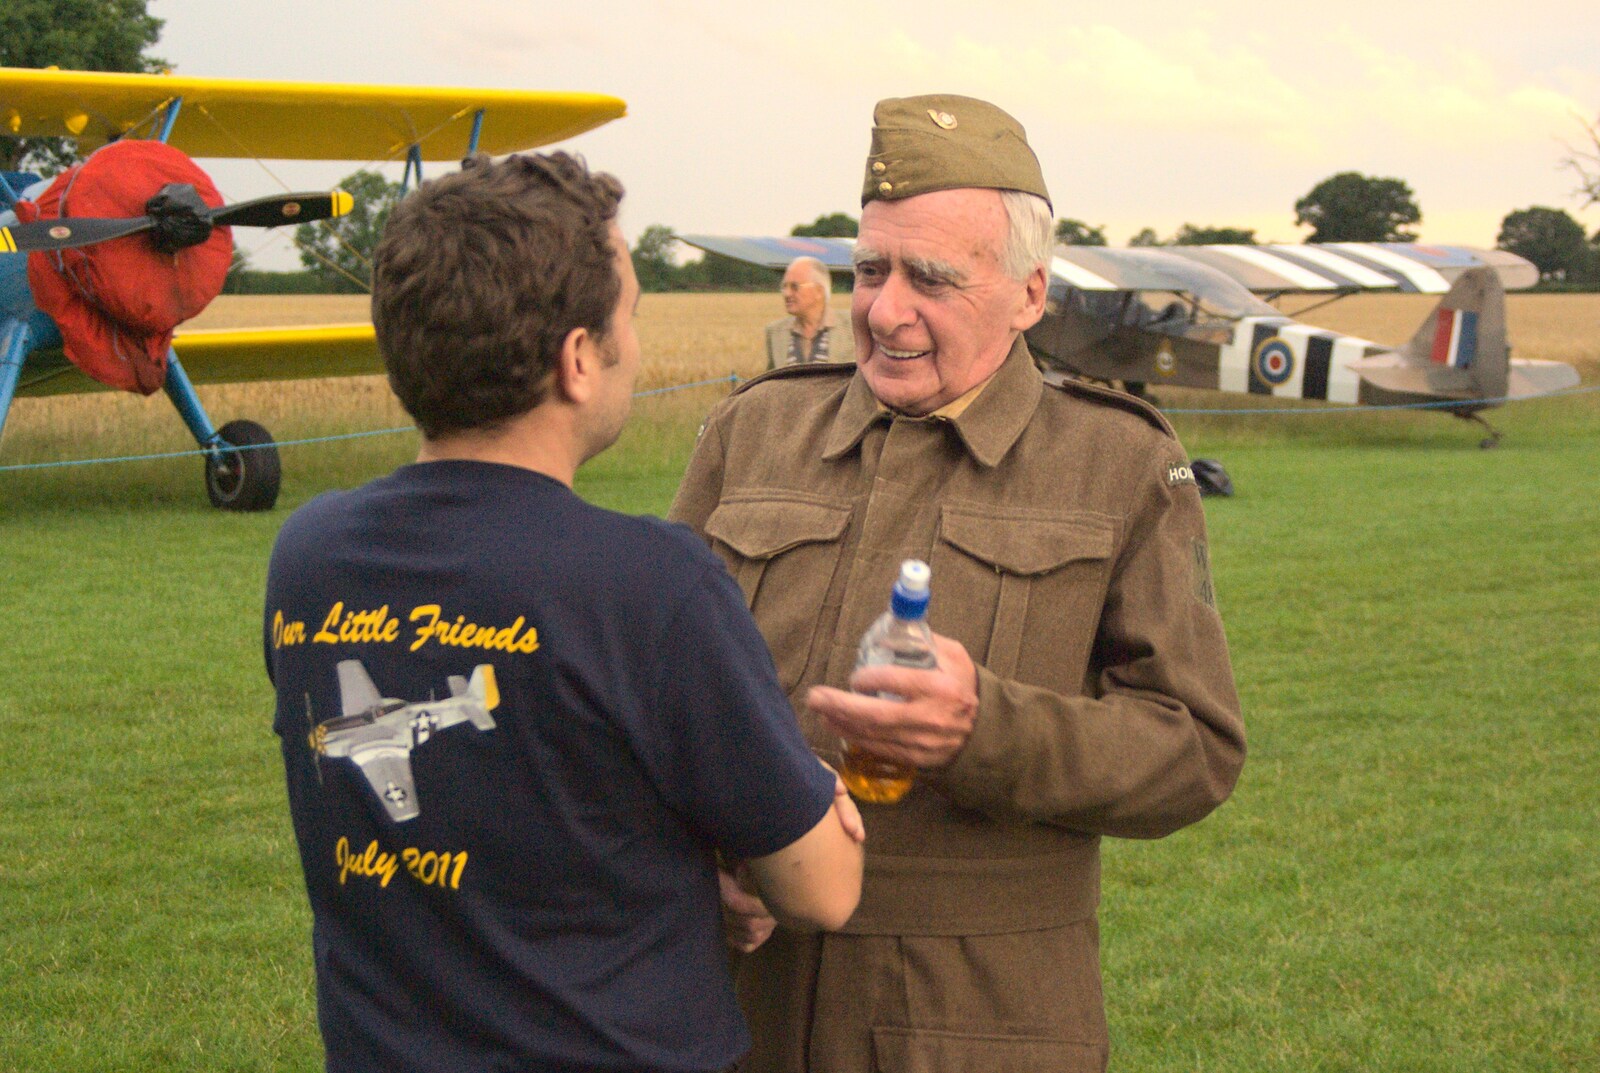 A John Laurie out of Dads' Army doppleganger from Maurice's Mustang Hangar Dance, Hardwick Airfield, Norfolk - 16th July 2011